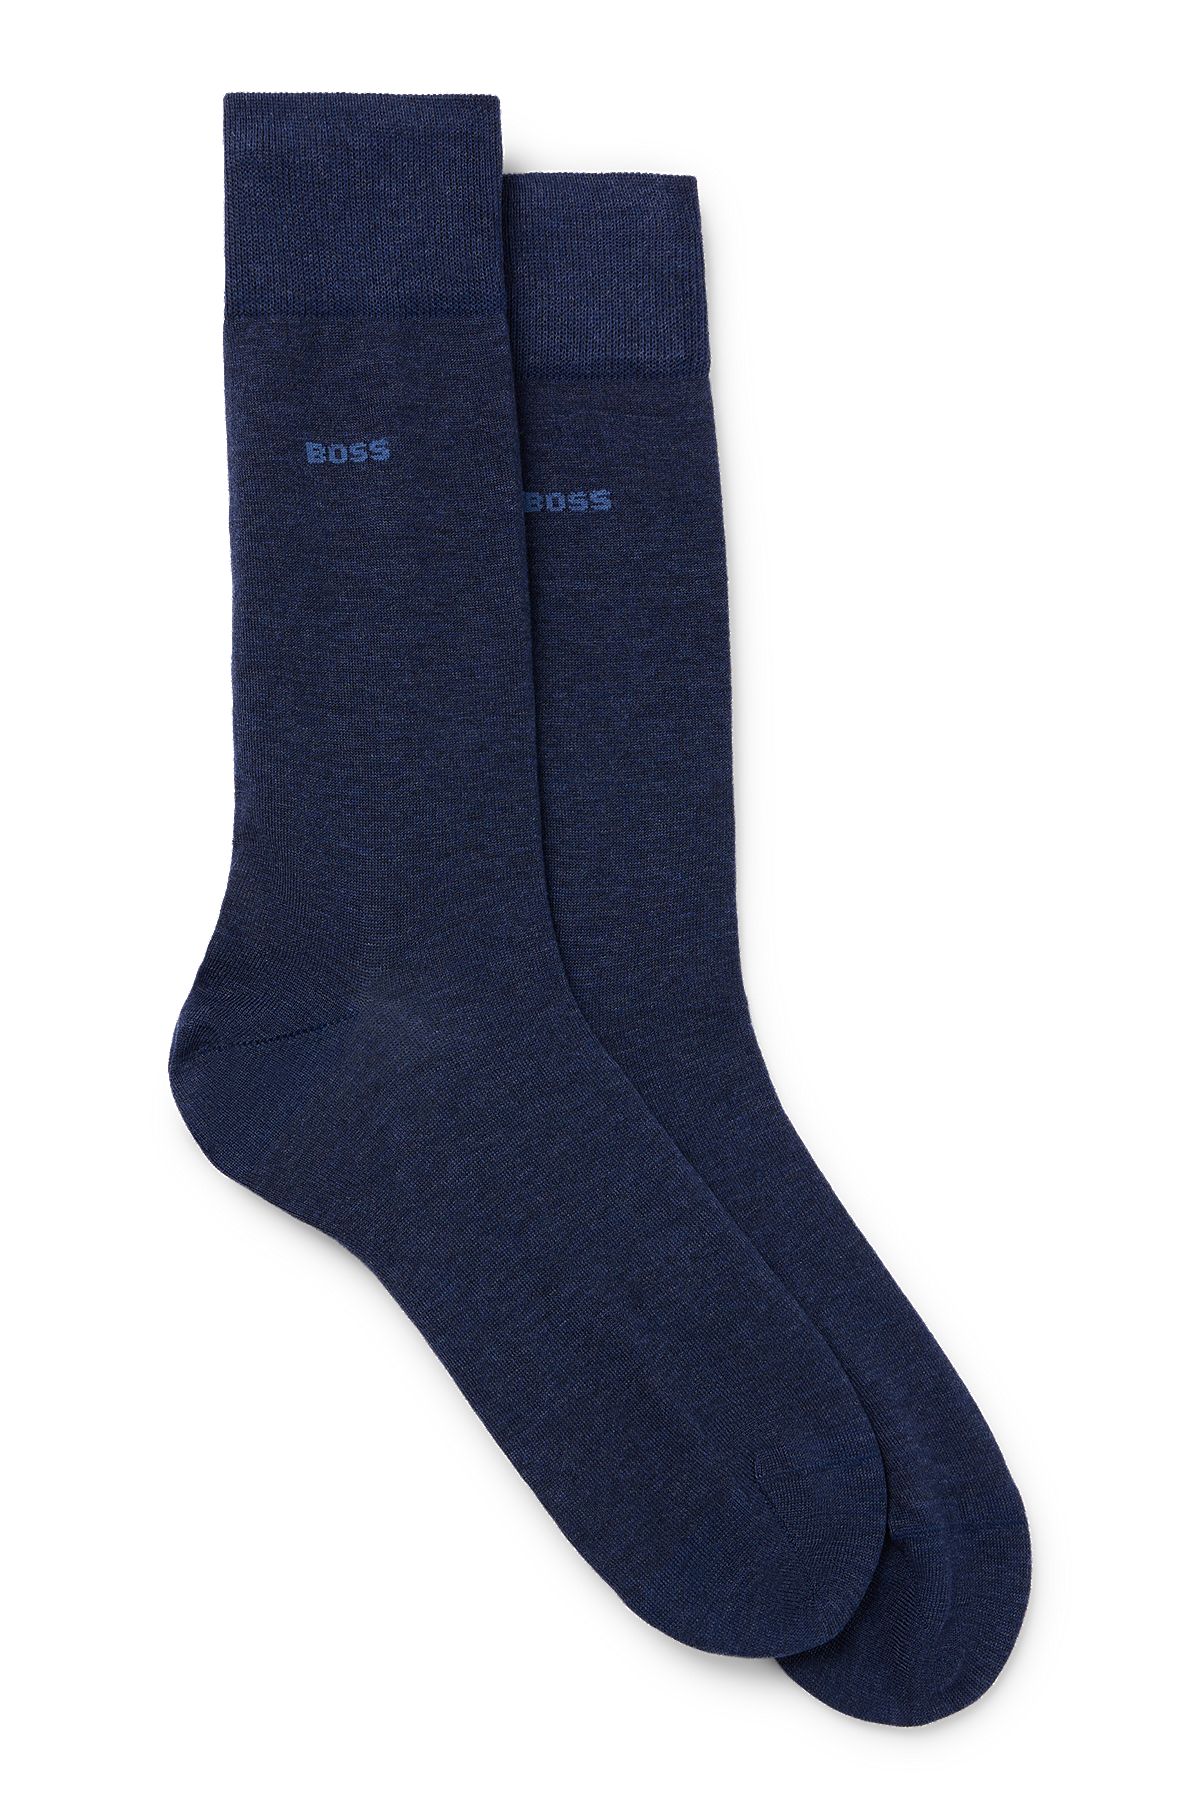 Louis Vuitton 5-in-1 Socks Brand Logo Printed Pure Color Cotton